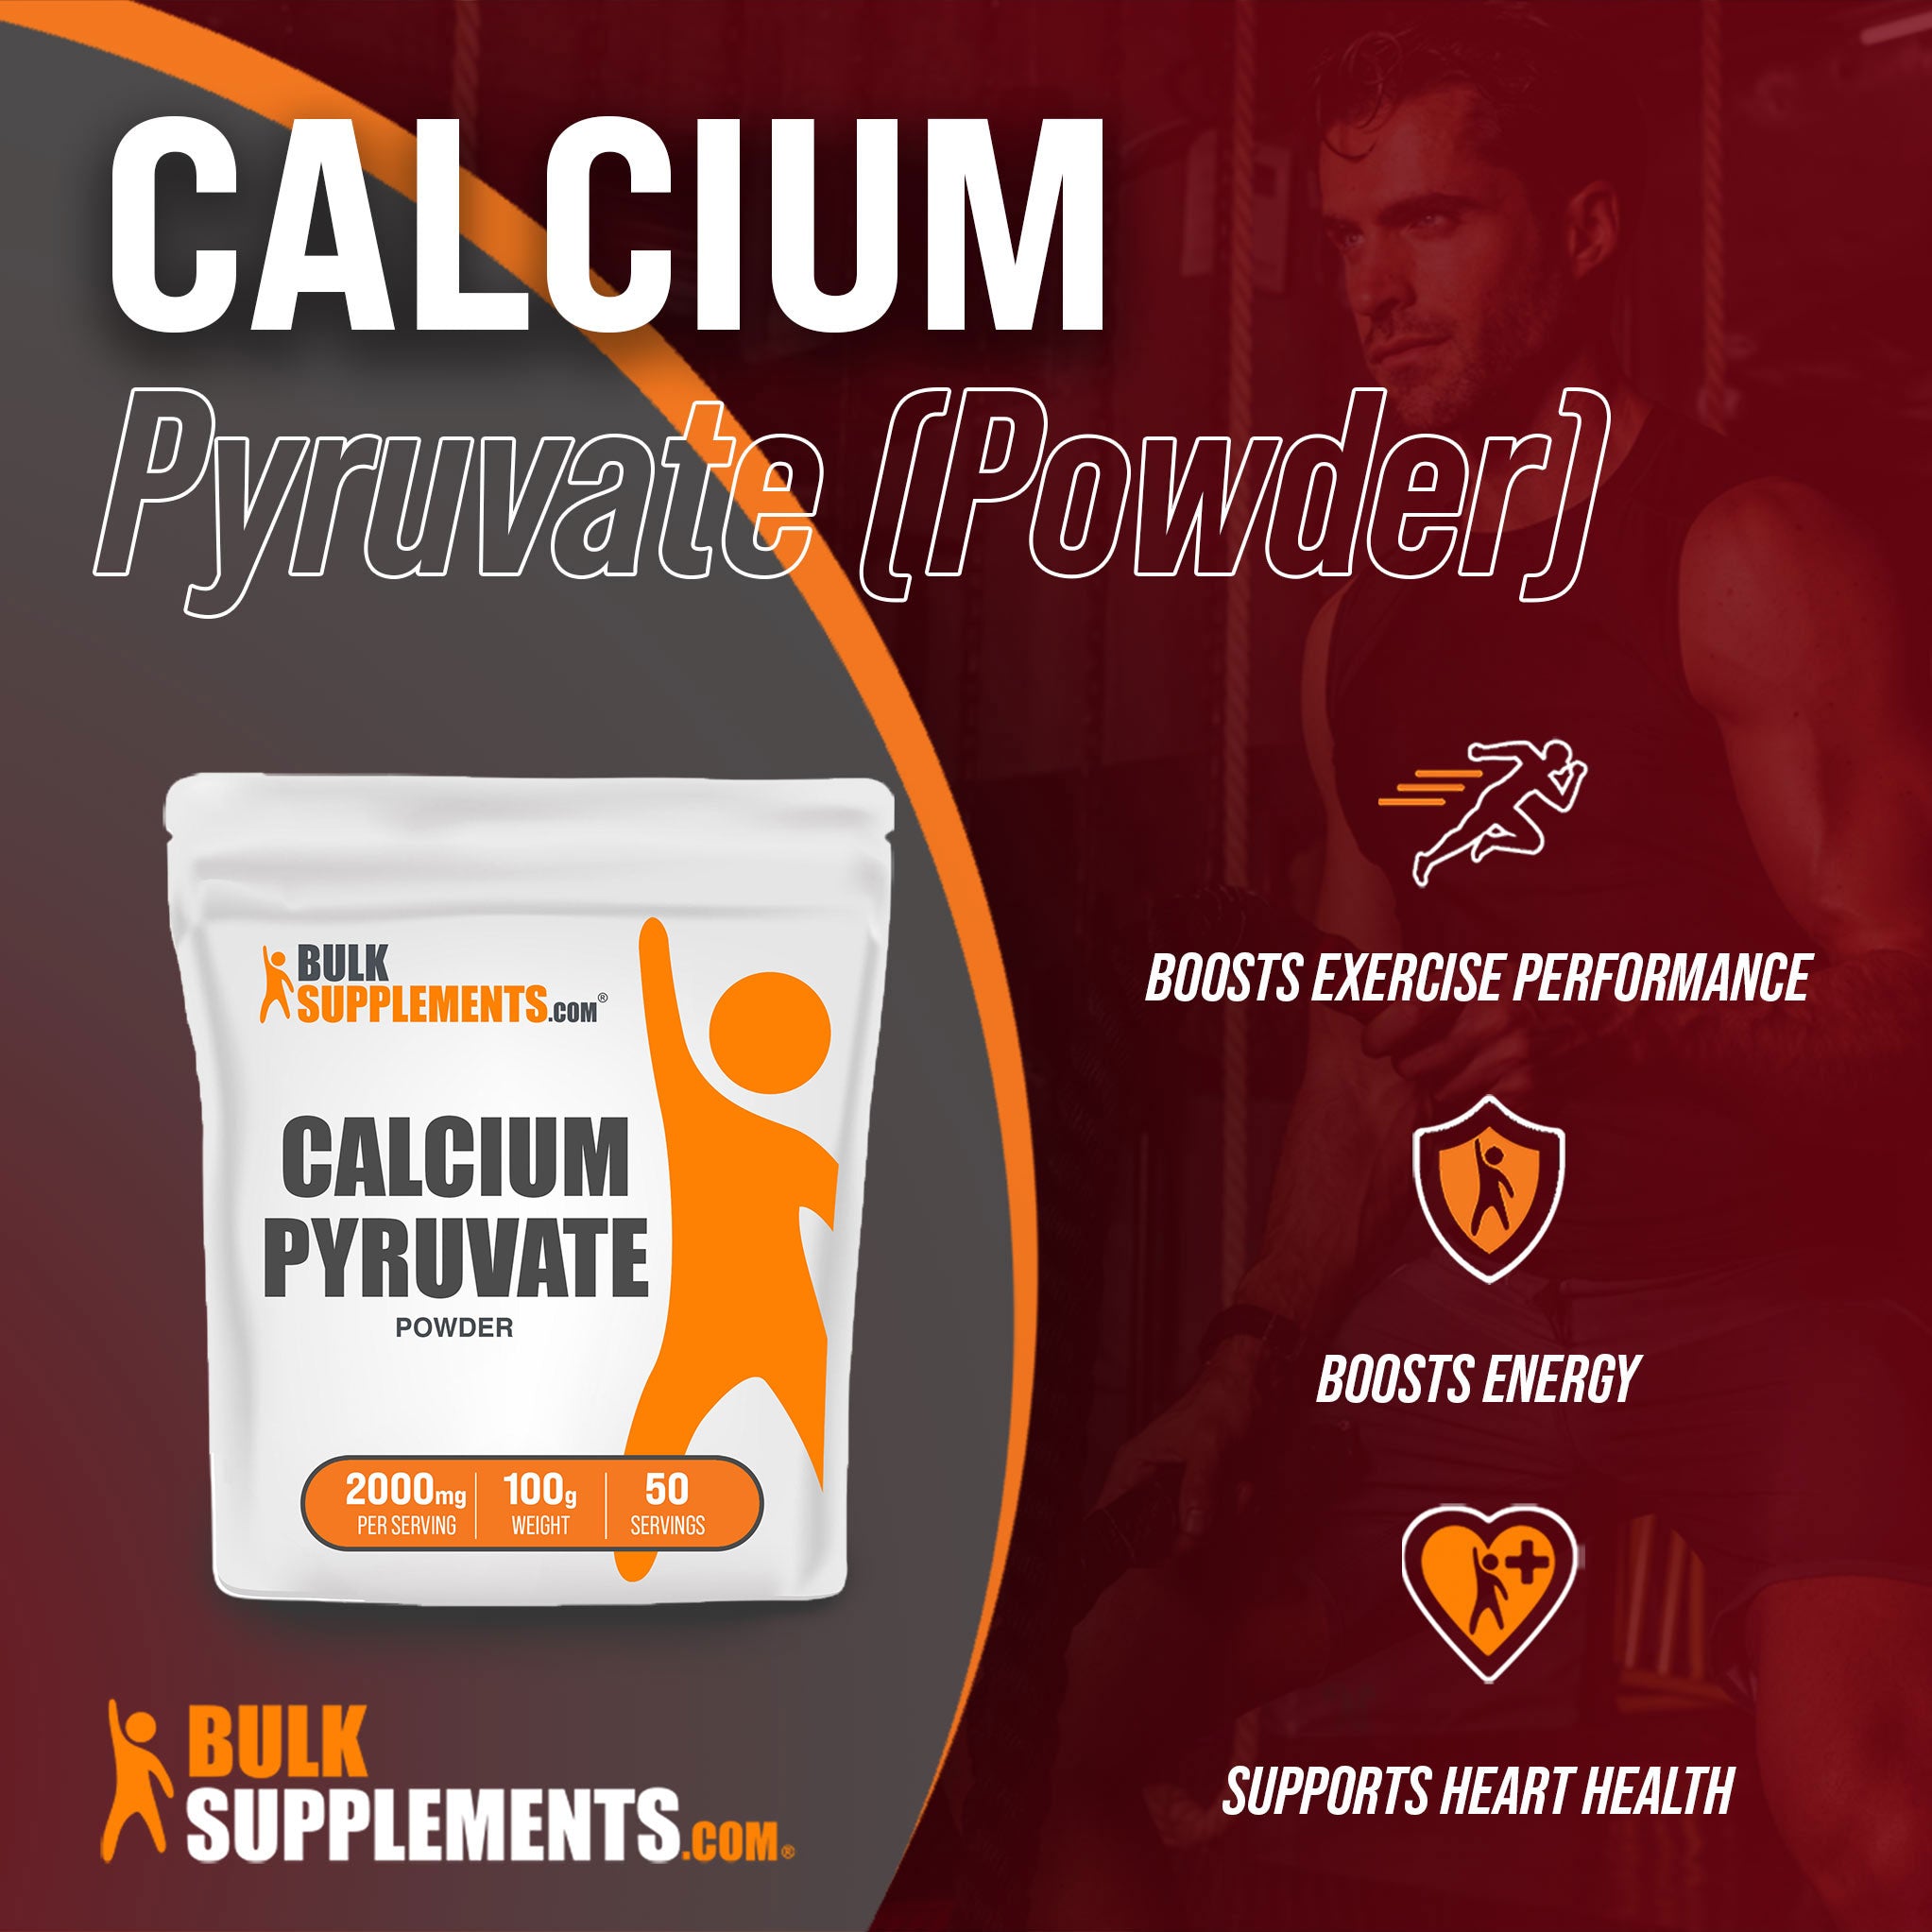 Benefits of Calcium Pyruvate Powder; boosts exercise performance, boosts energy, supports heart health